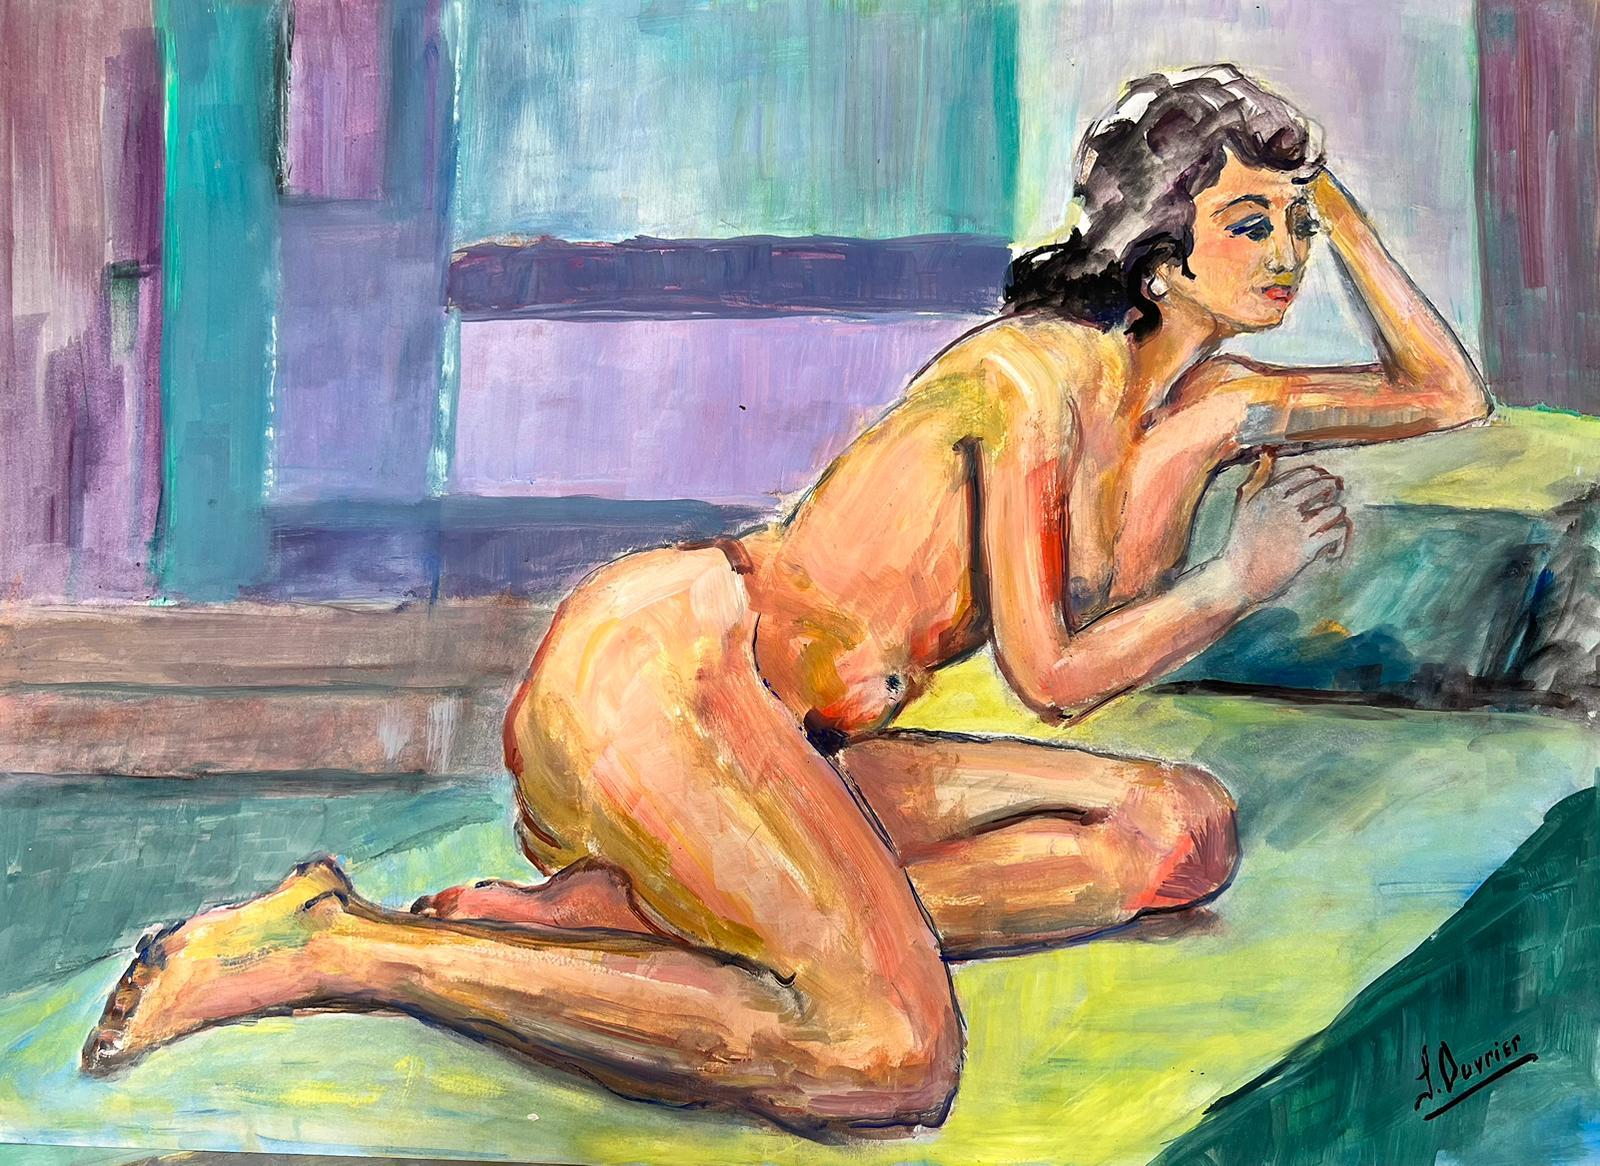 The Artists Model
Portrait of a Nude Lady reclining
French School, circa 1970's
indistinctly signed 
oil painting on card, unframed
size: 18 x 26 inches
condition: overall very good, a very few light markings to the surface but nothing detrimental